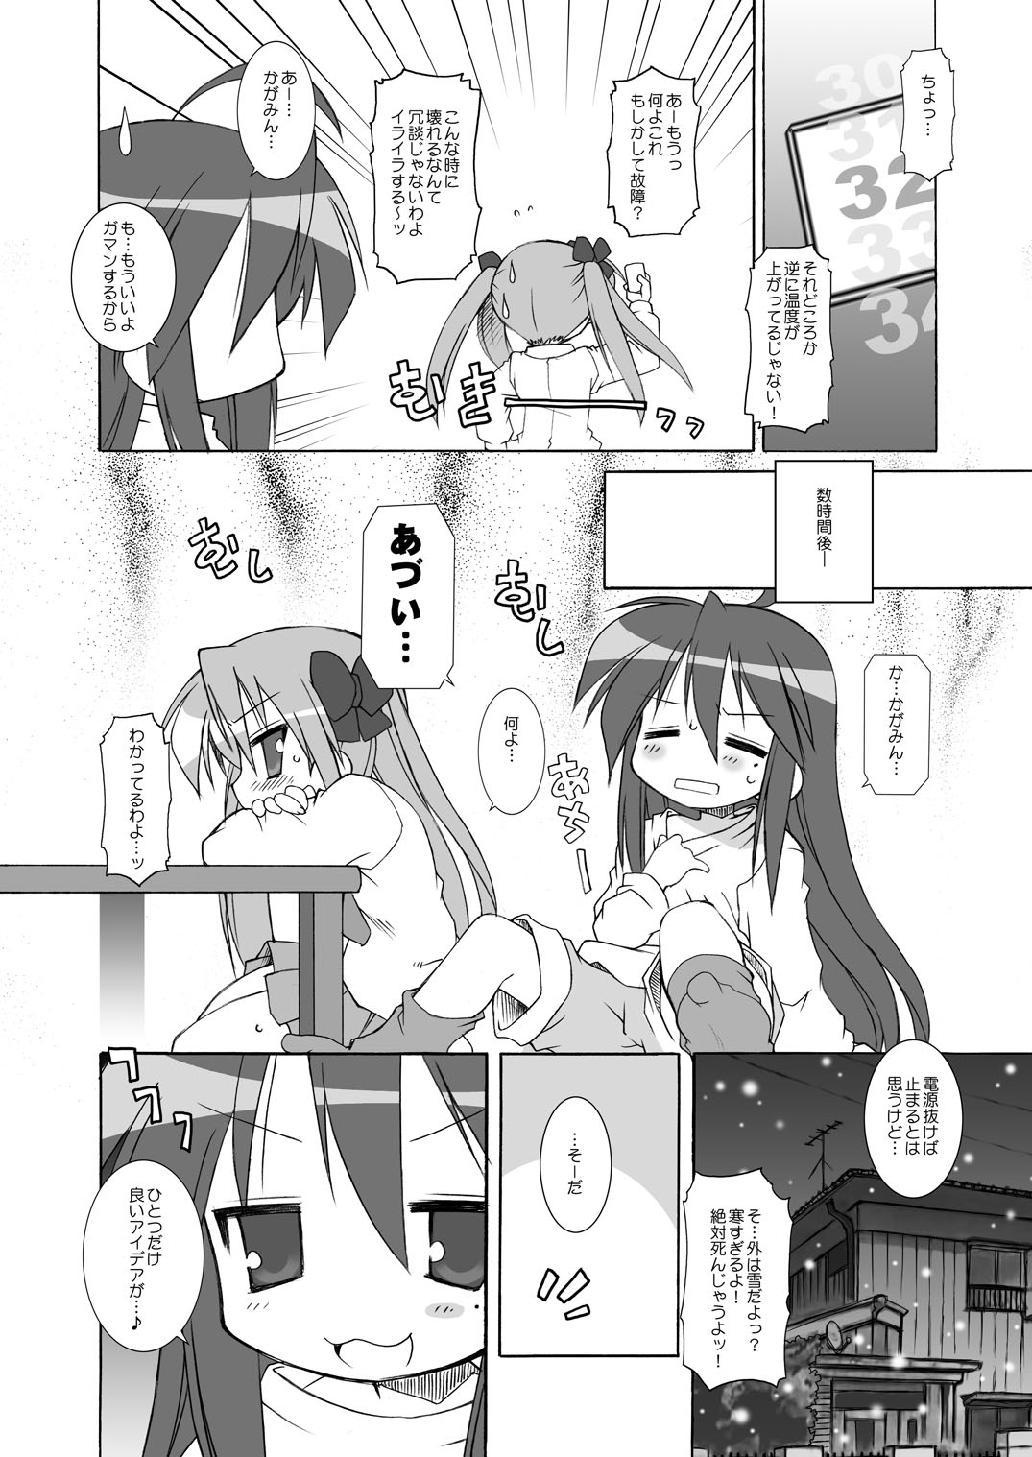 Humiliation WINTER☆FEVER! - Lucky star Shaven - Page 8